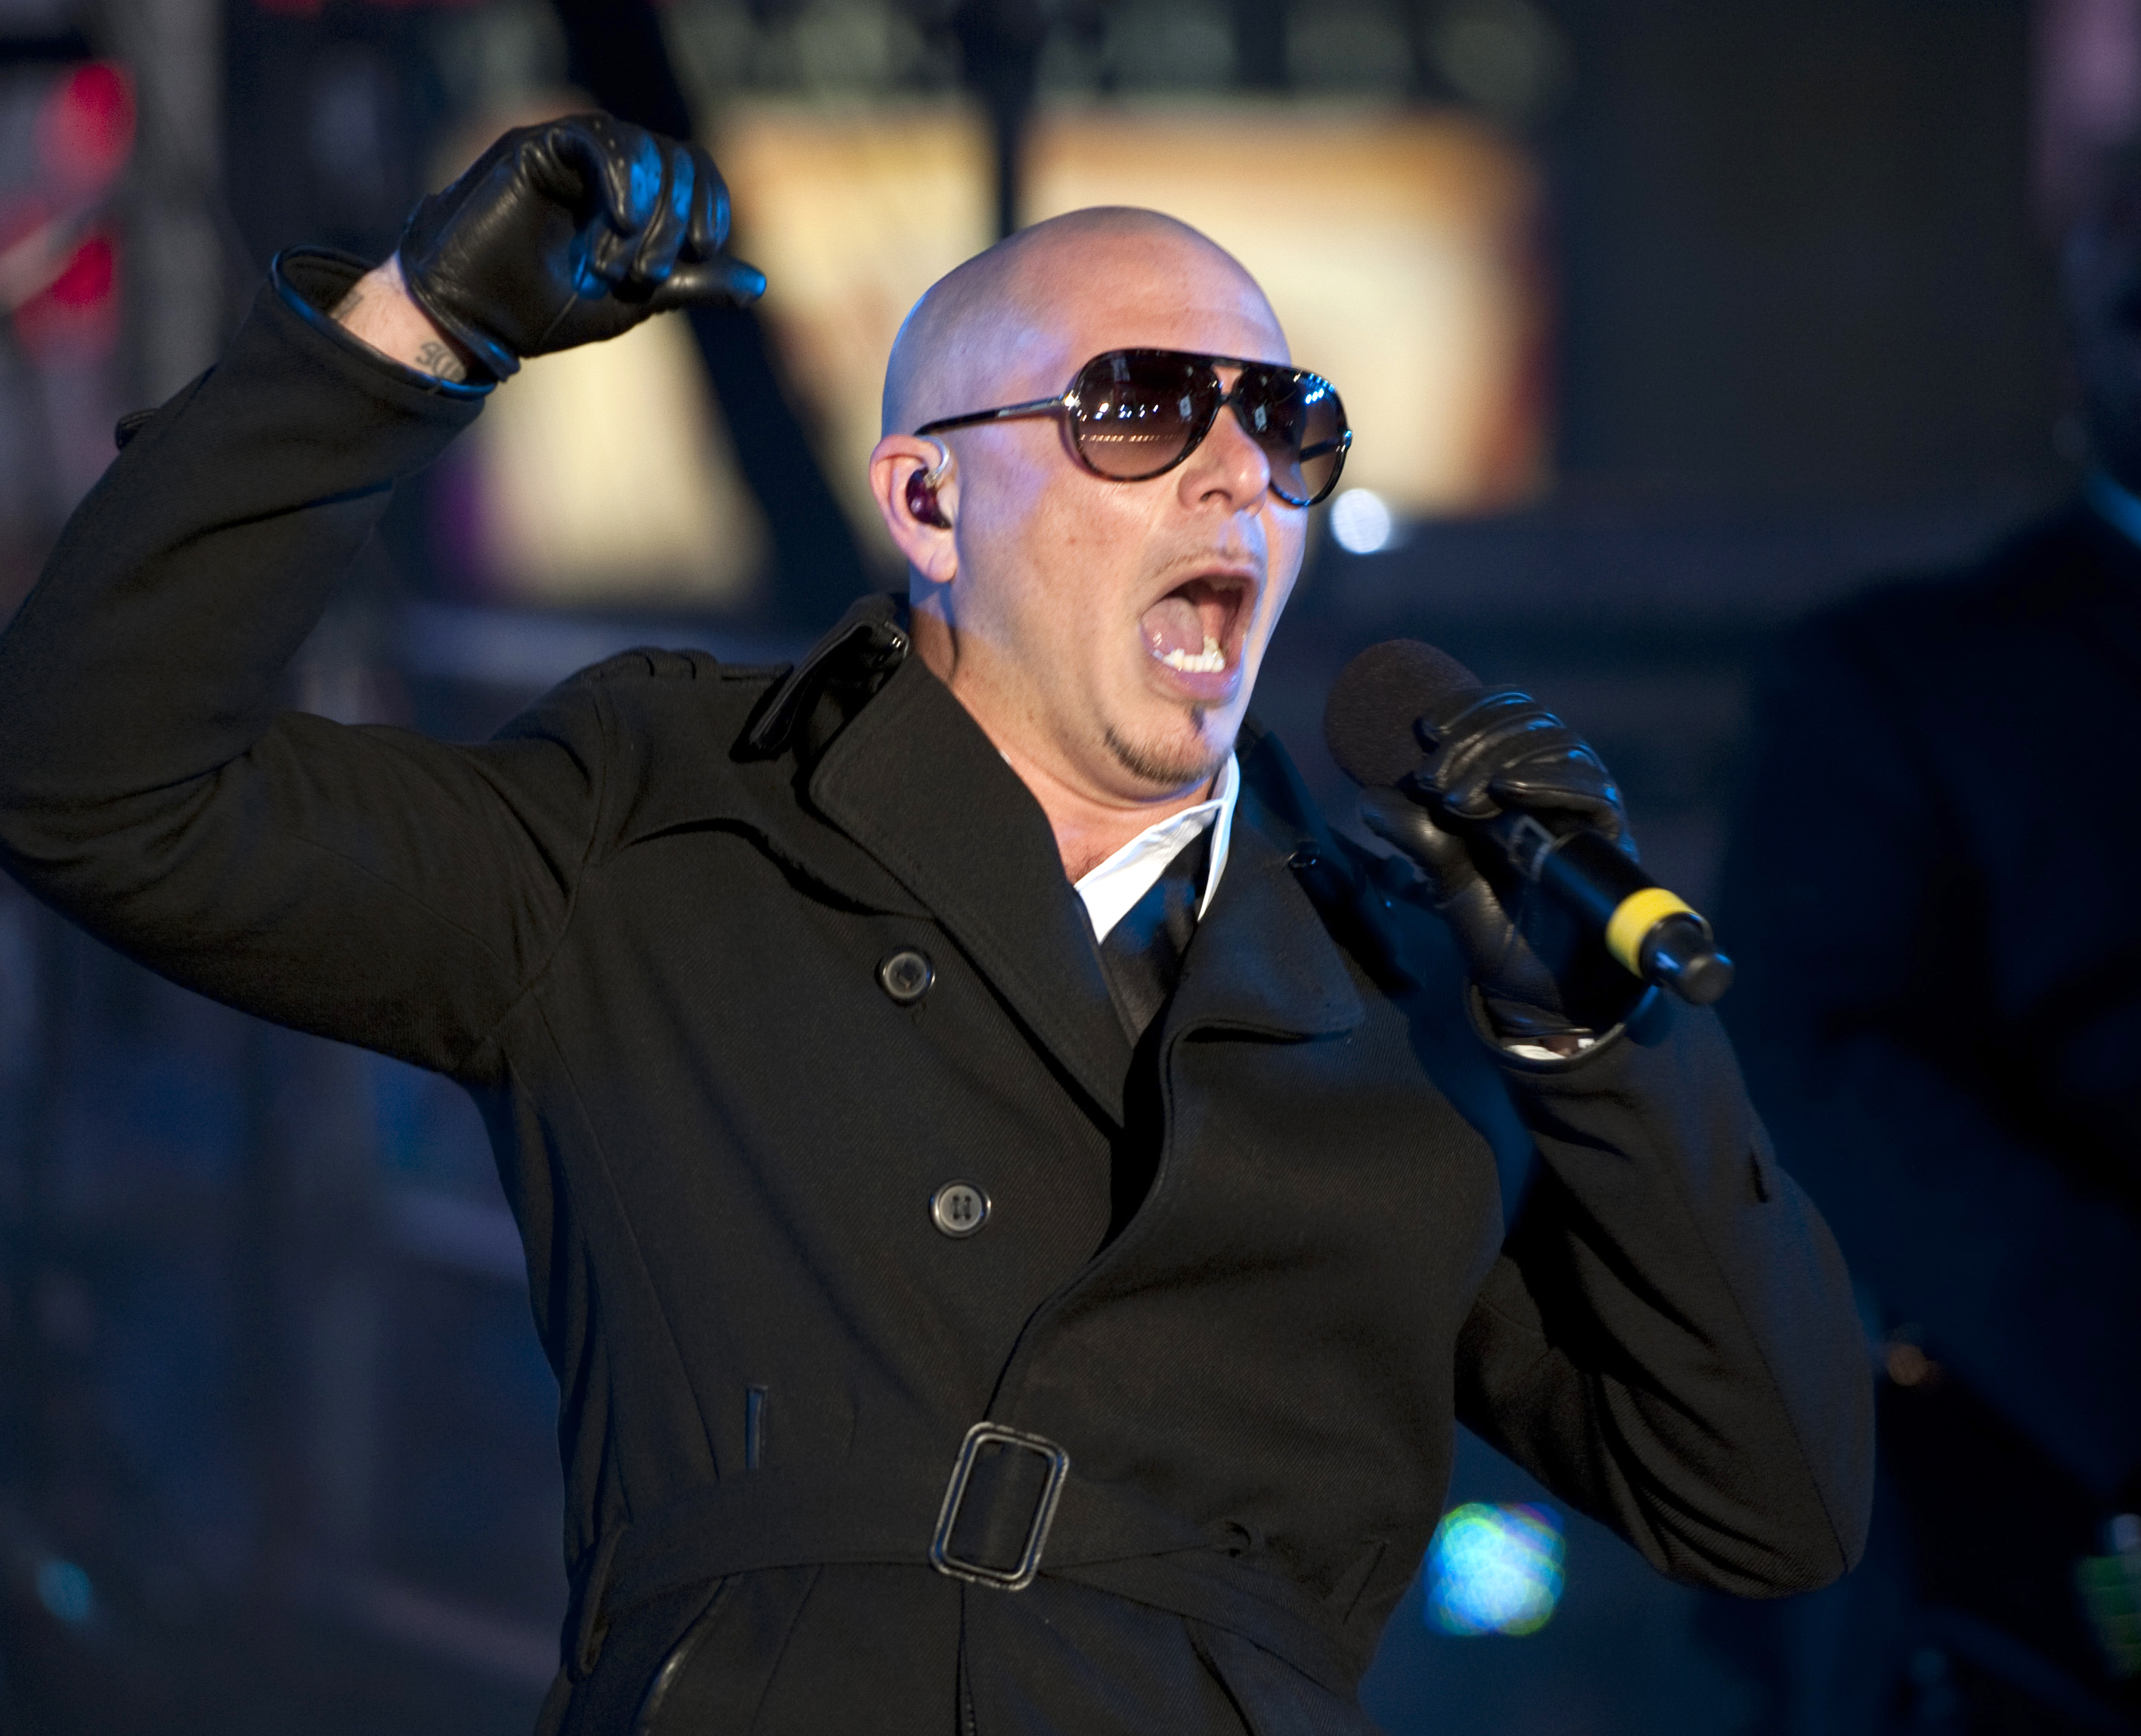 Pitbull performs during the New Year's E